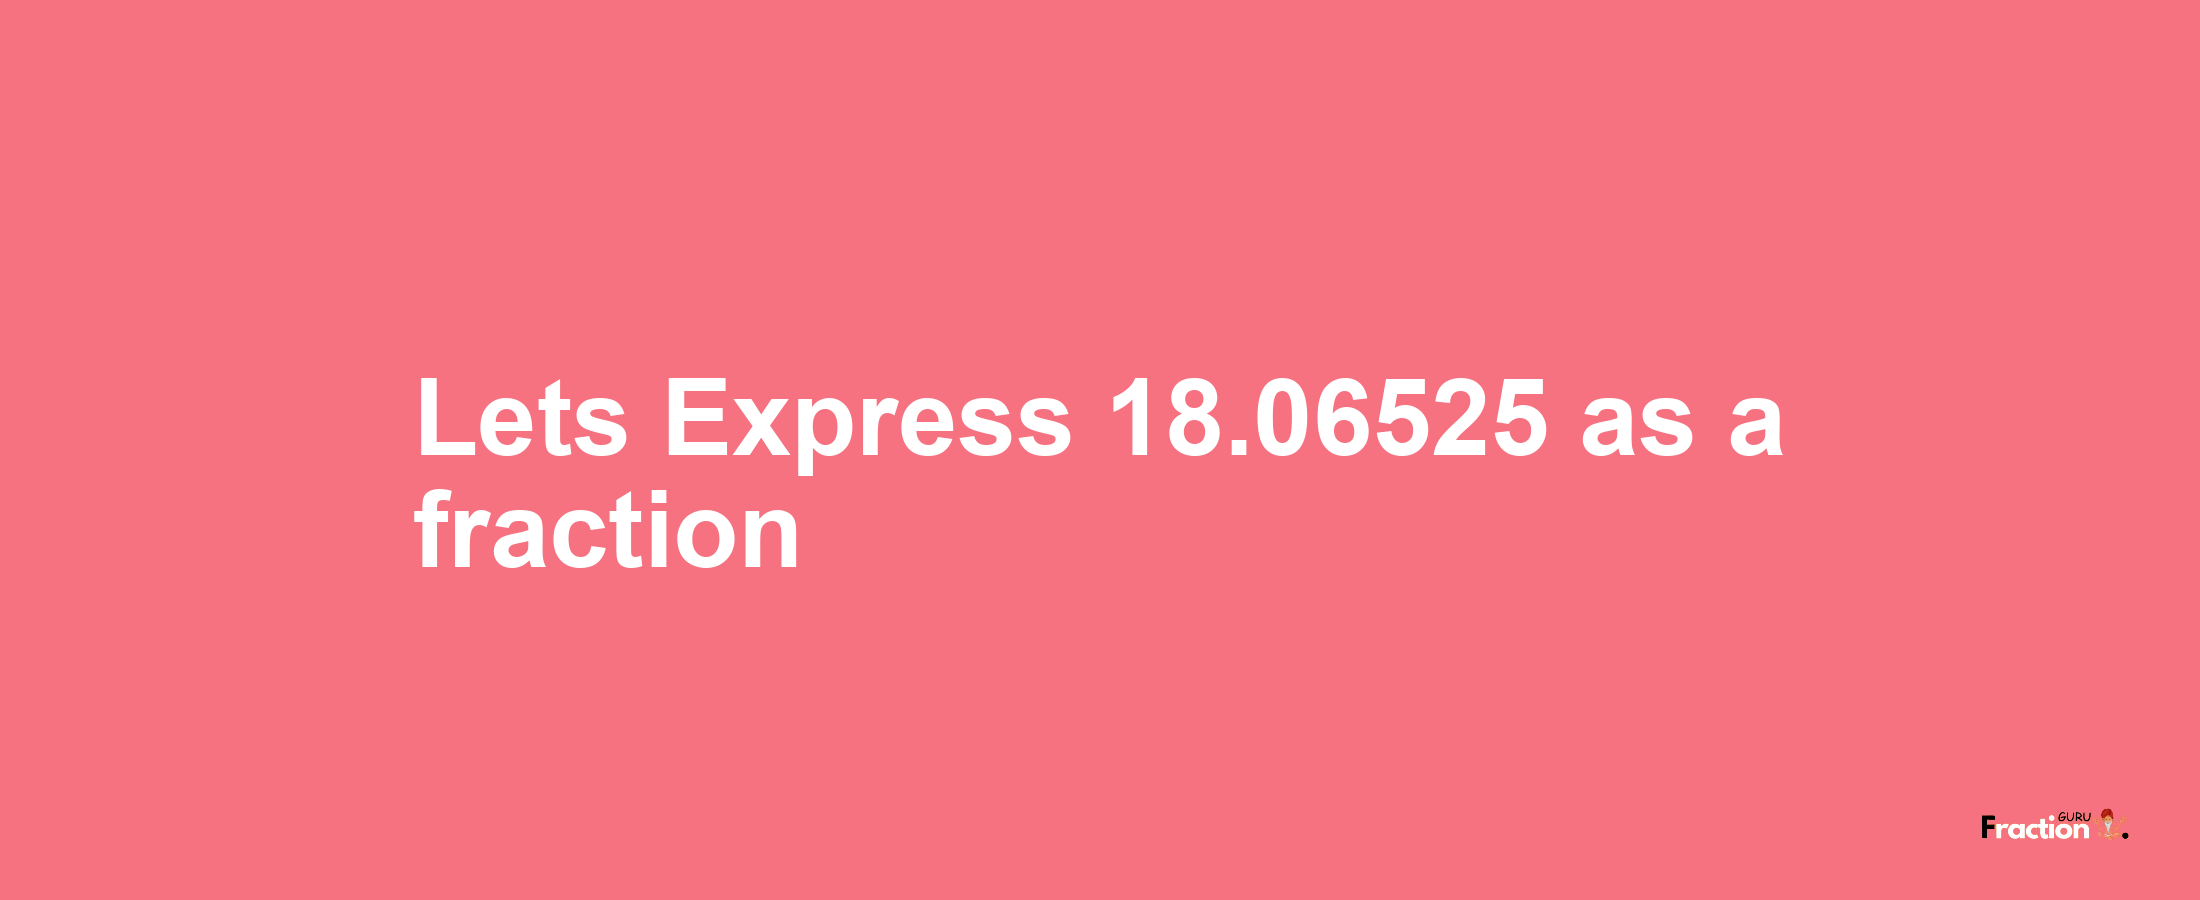 Lets Express 18.06525 as afraction